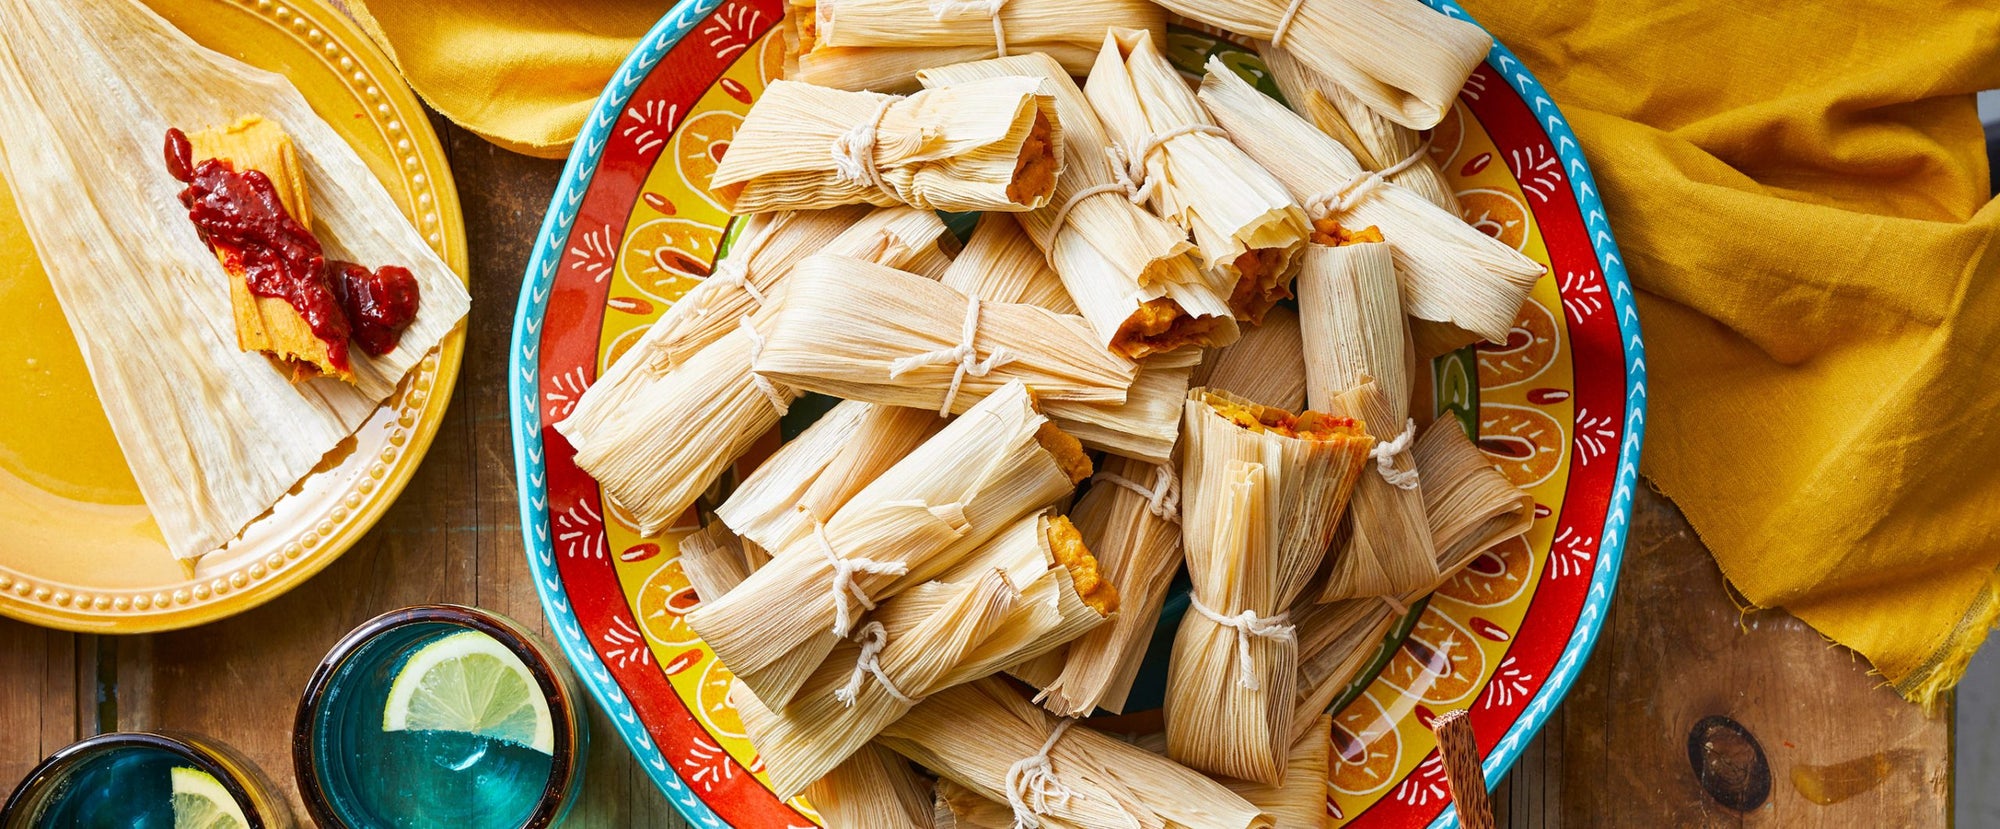 Small Tin Can - Delicious Tamales